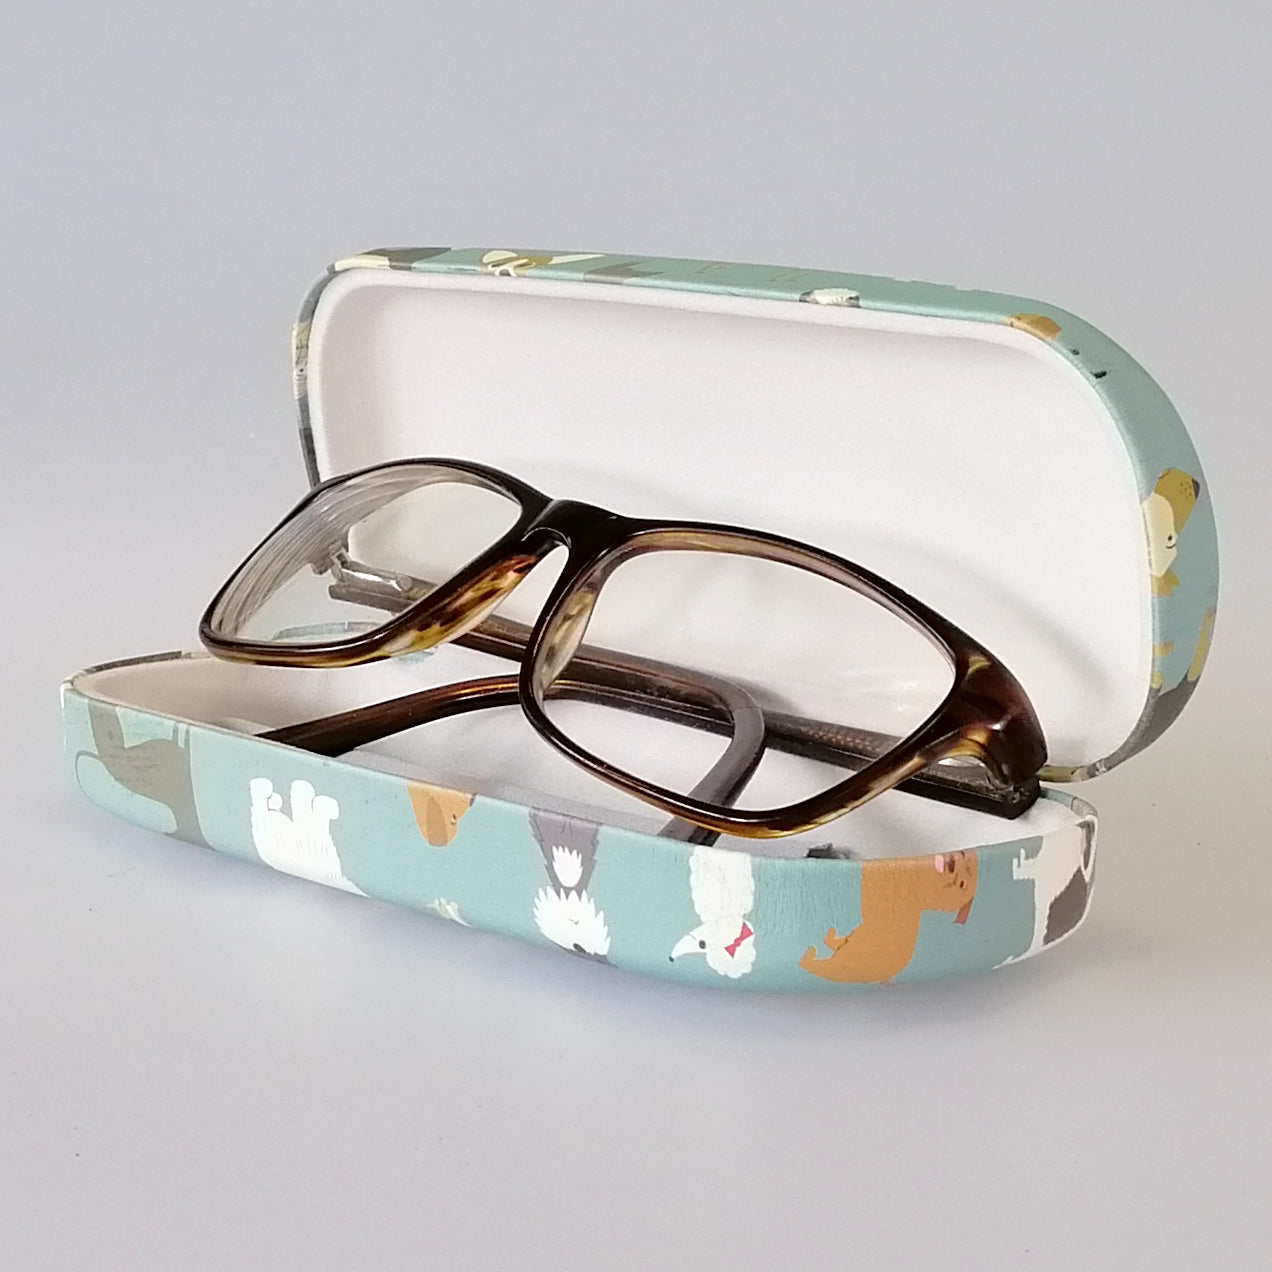 Best In Show - Glasses Case